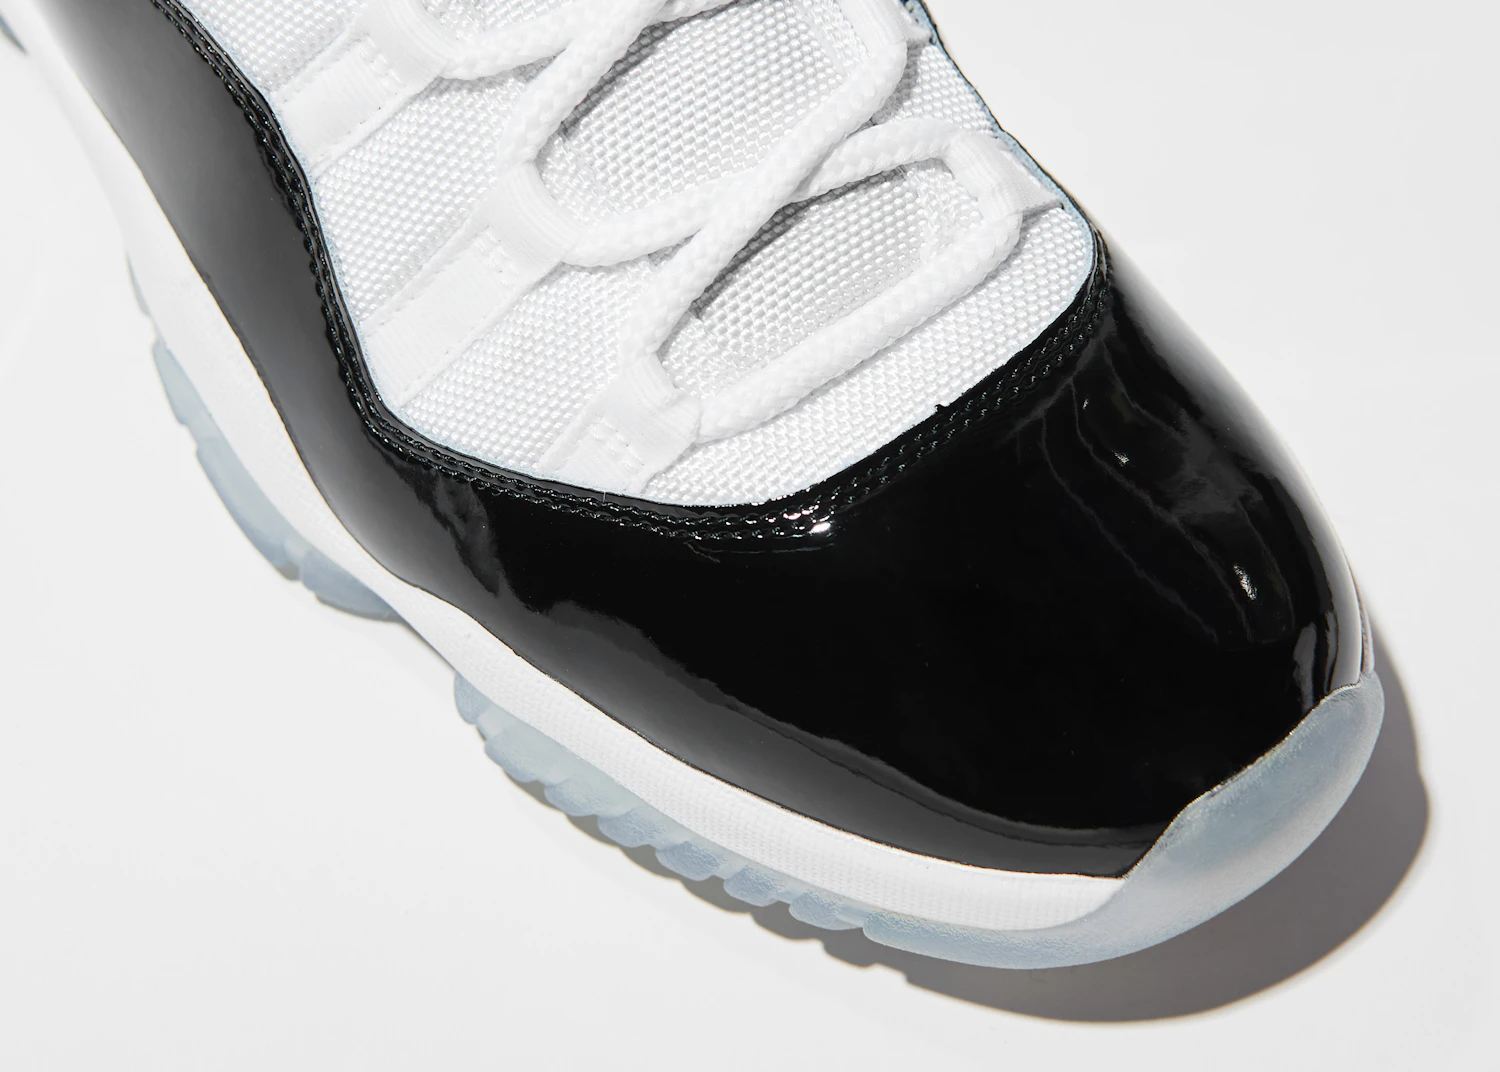 The shiny patent leather is reminiscent of a luxury car's body. This was inspired by the high-end sports cars Michael Jordan loved.